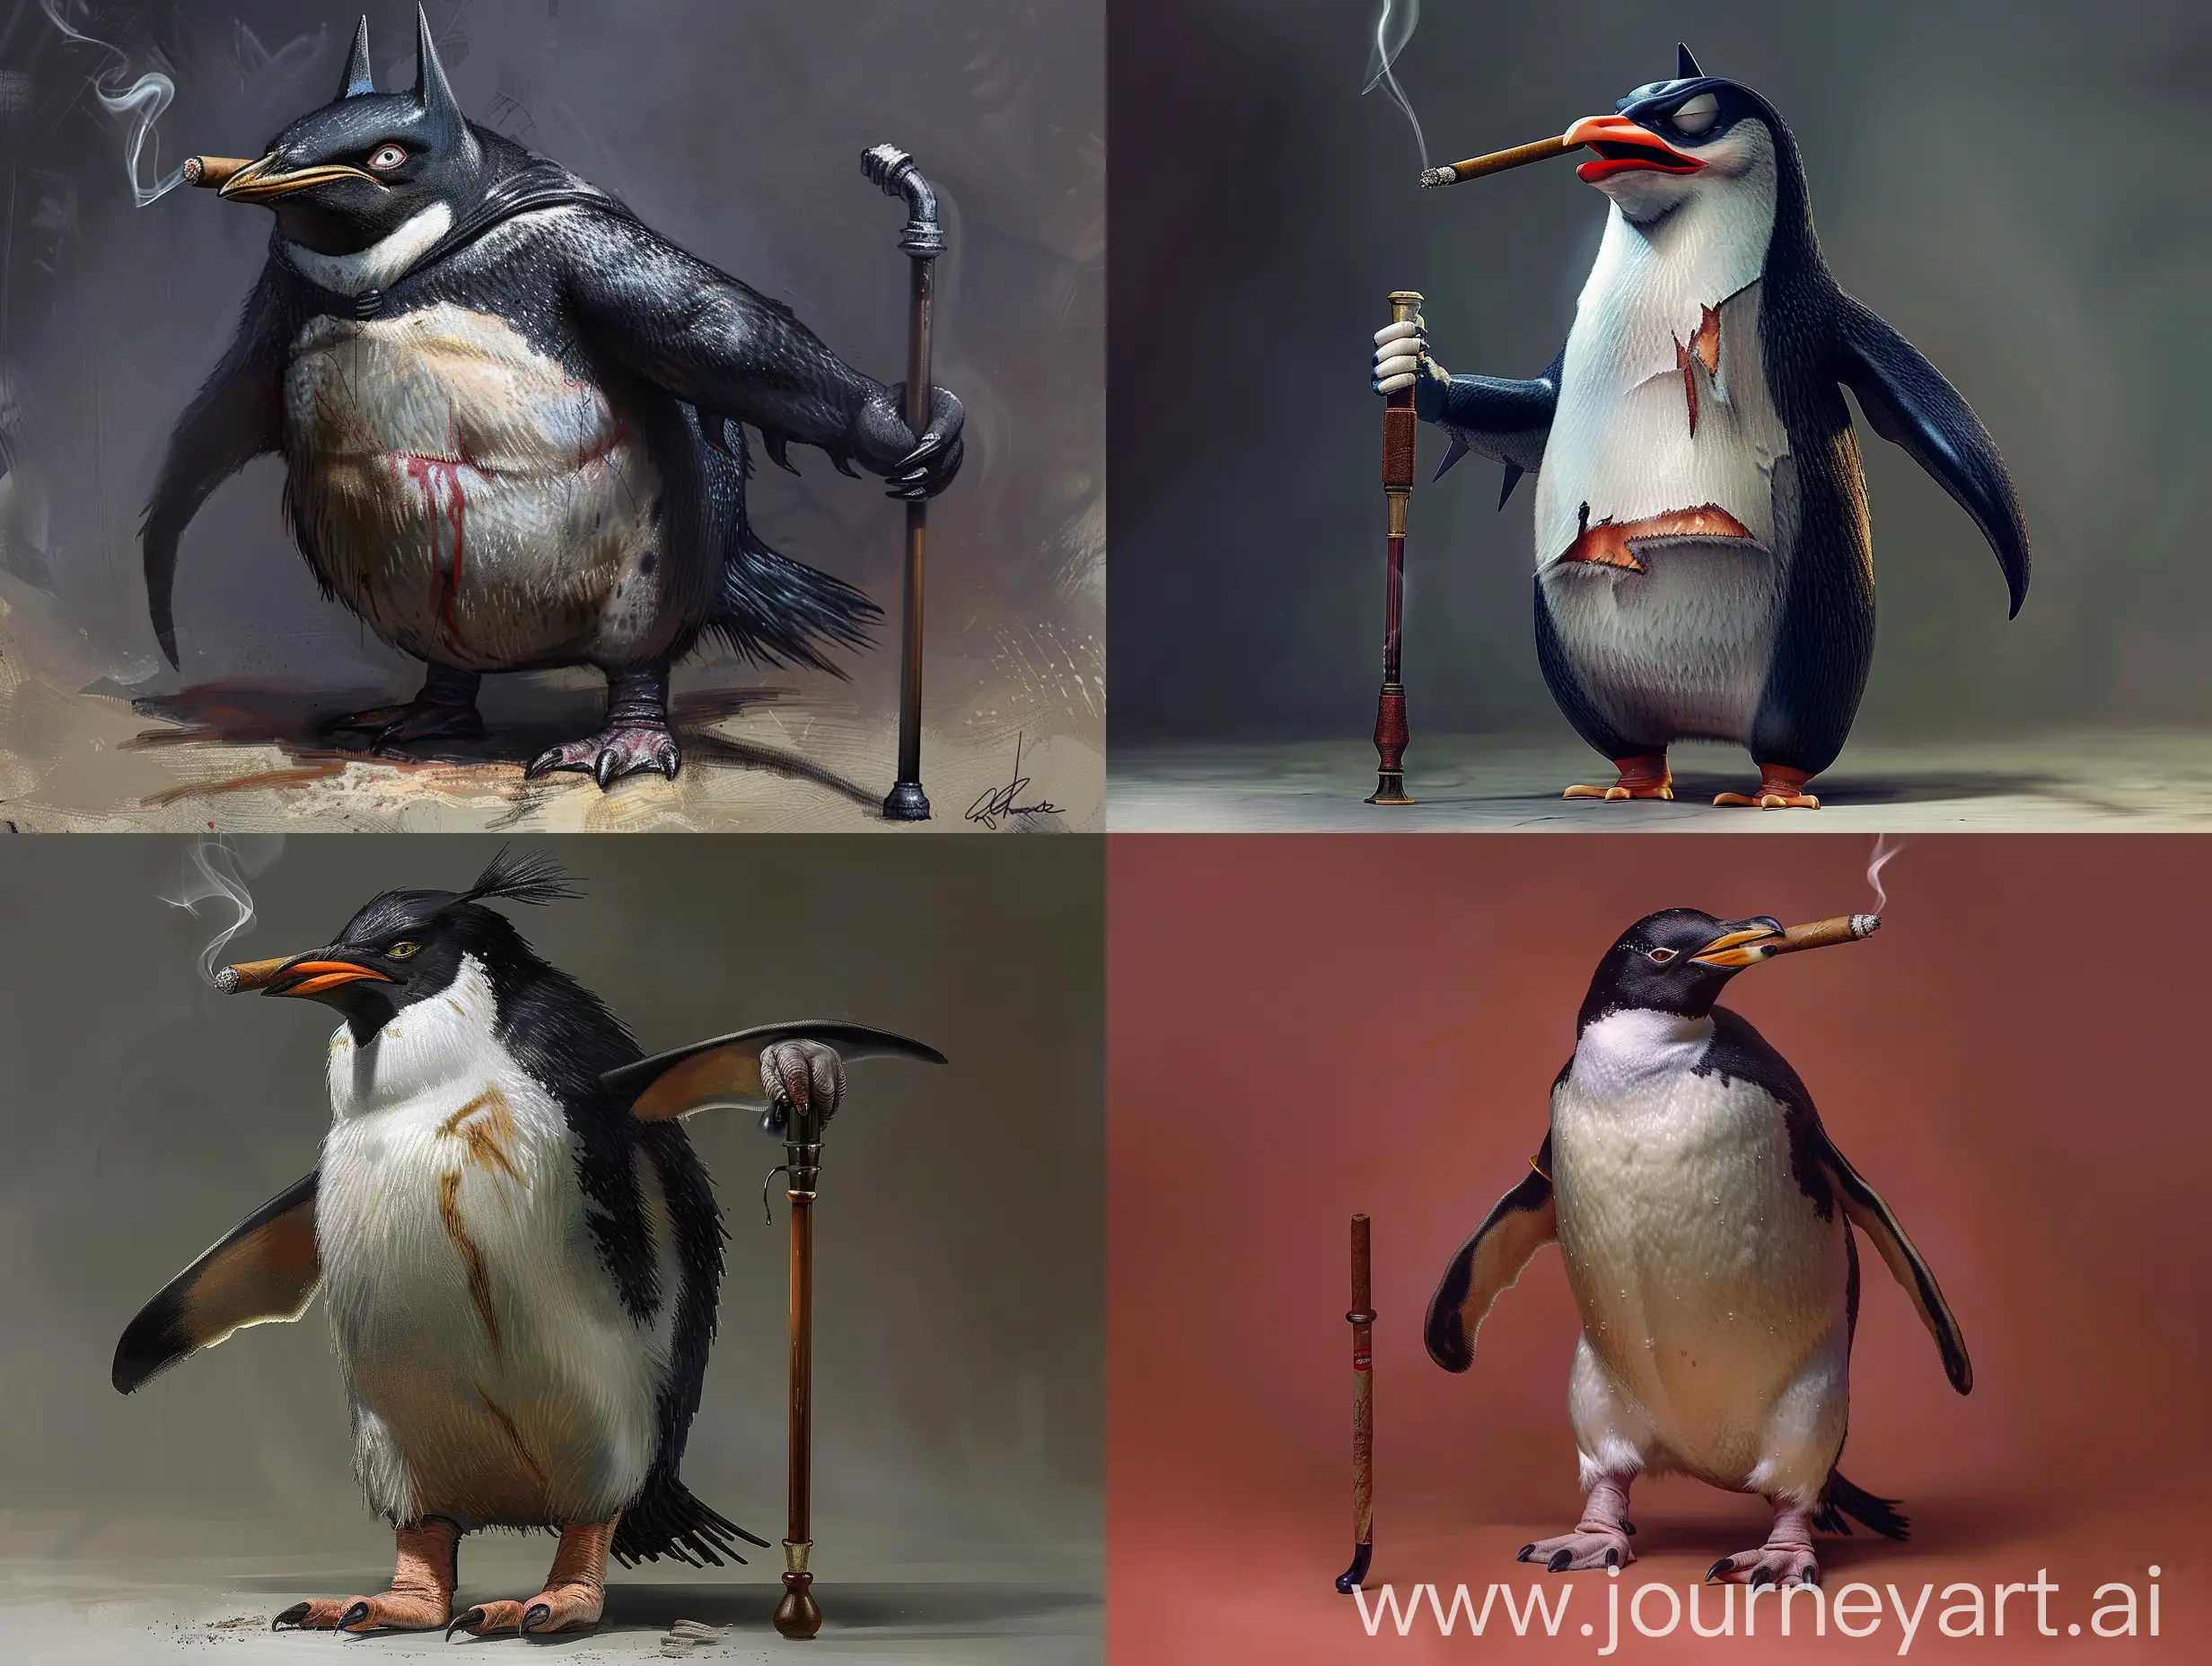 Oswald Kobolpot, nicknamed "Penguin" from the Batman movie, in full growth with a cigar in his mouth and a cane 